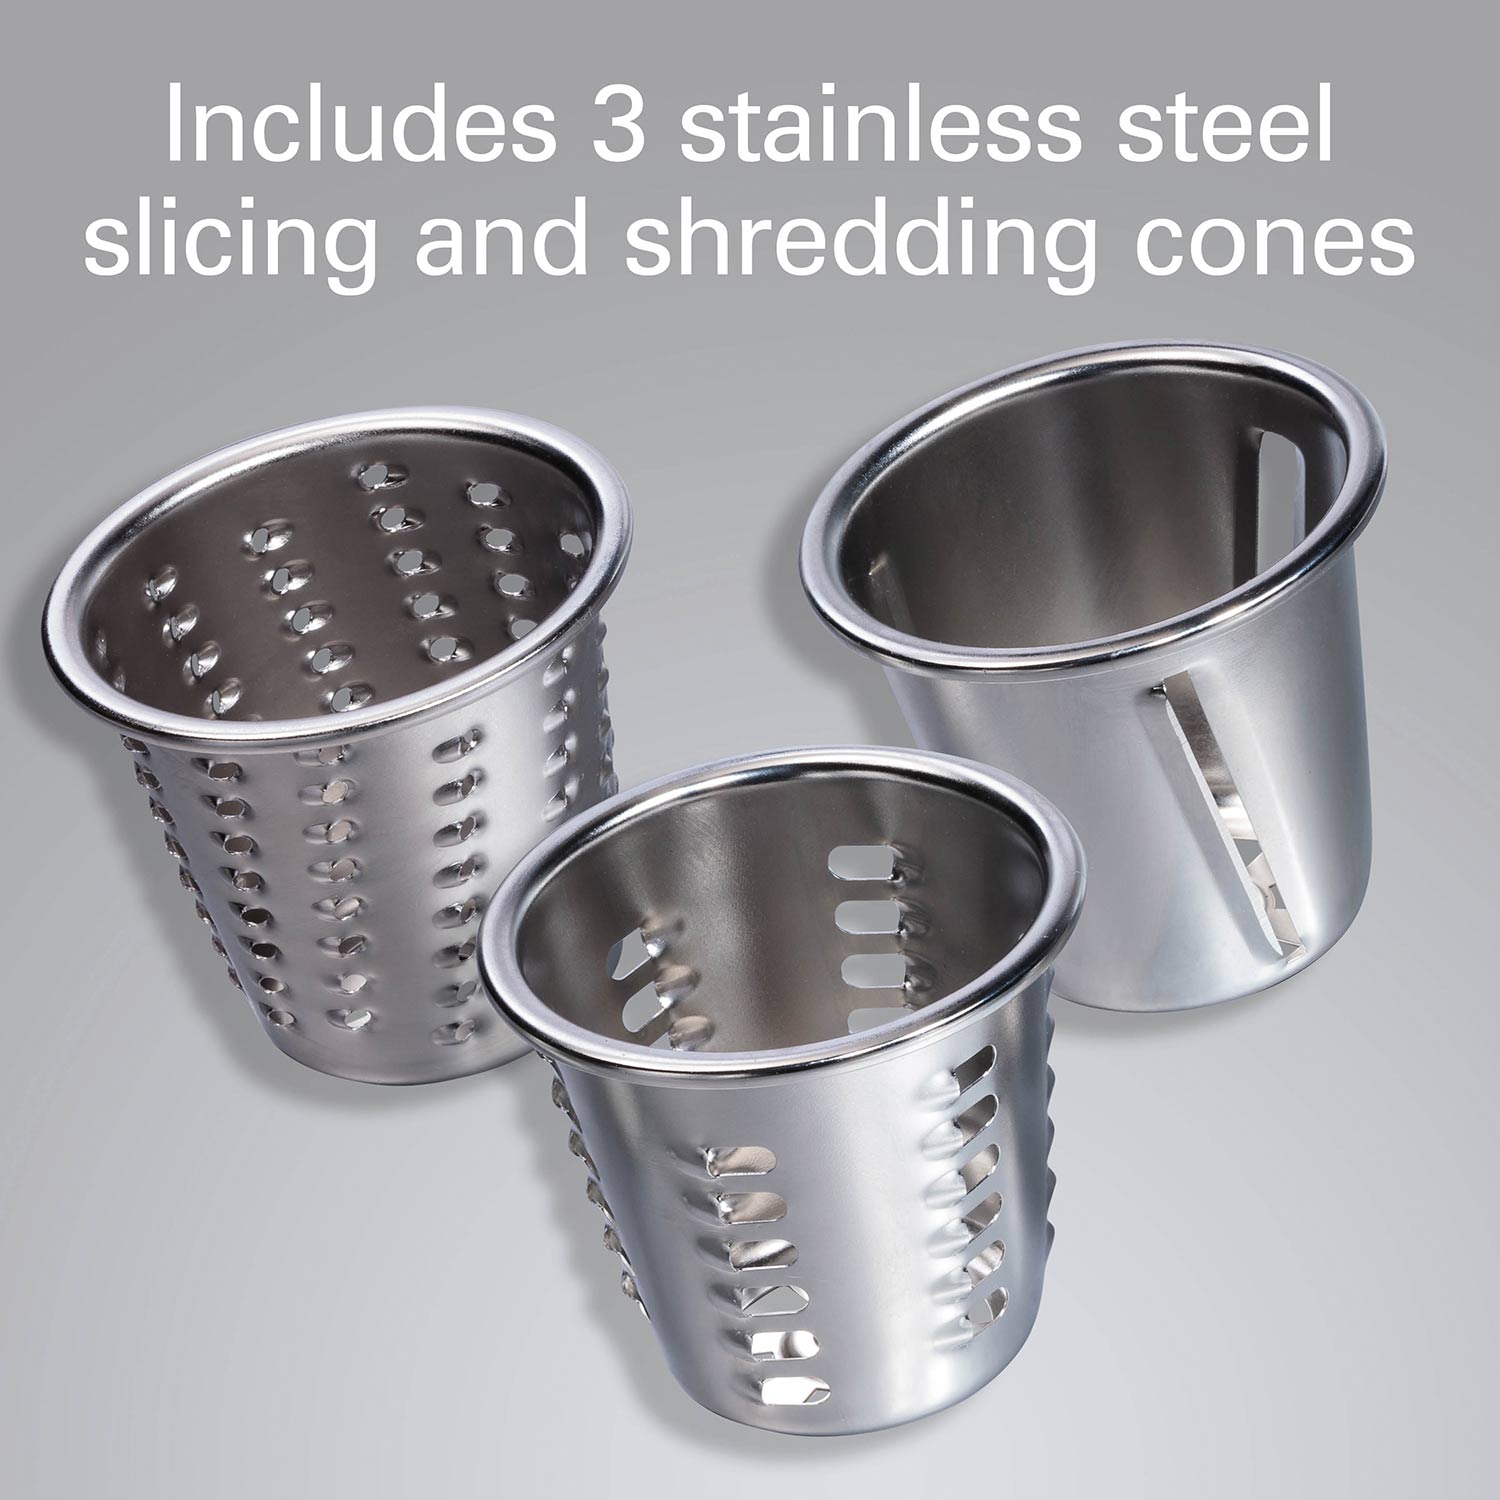 Stainless Steel Slicer Shredder Attachment with 3 Sizes Blades for